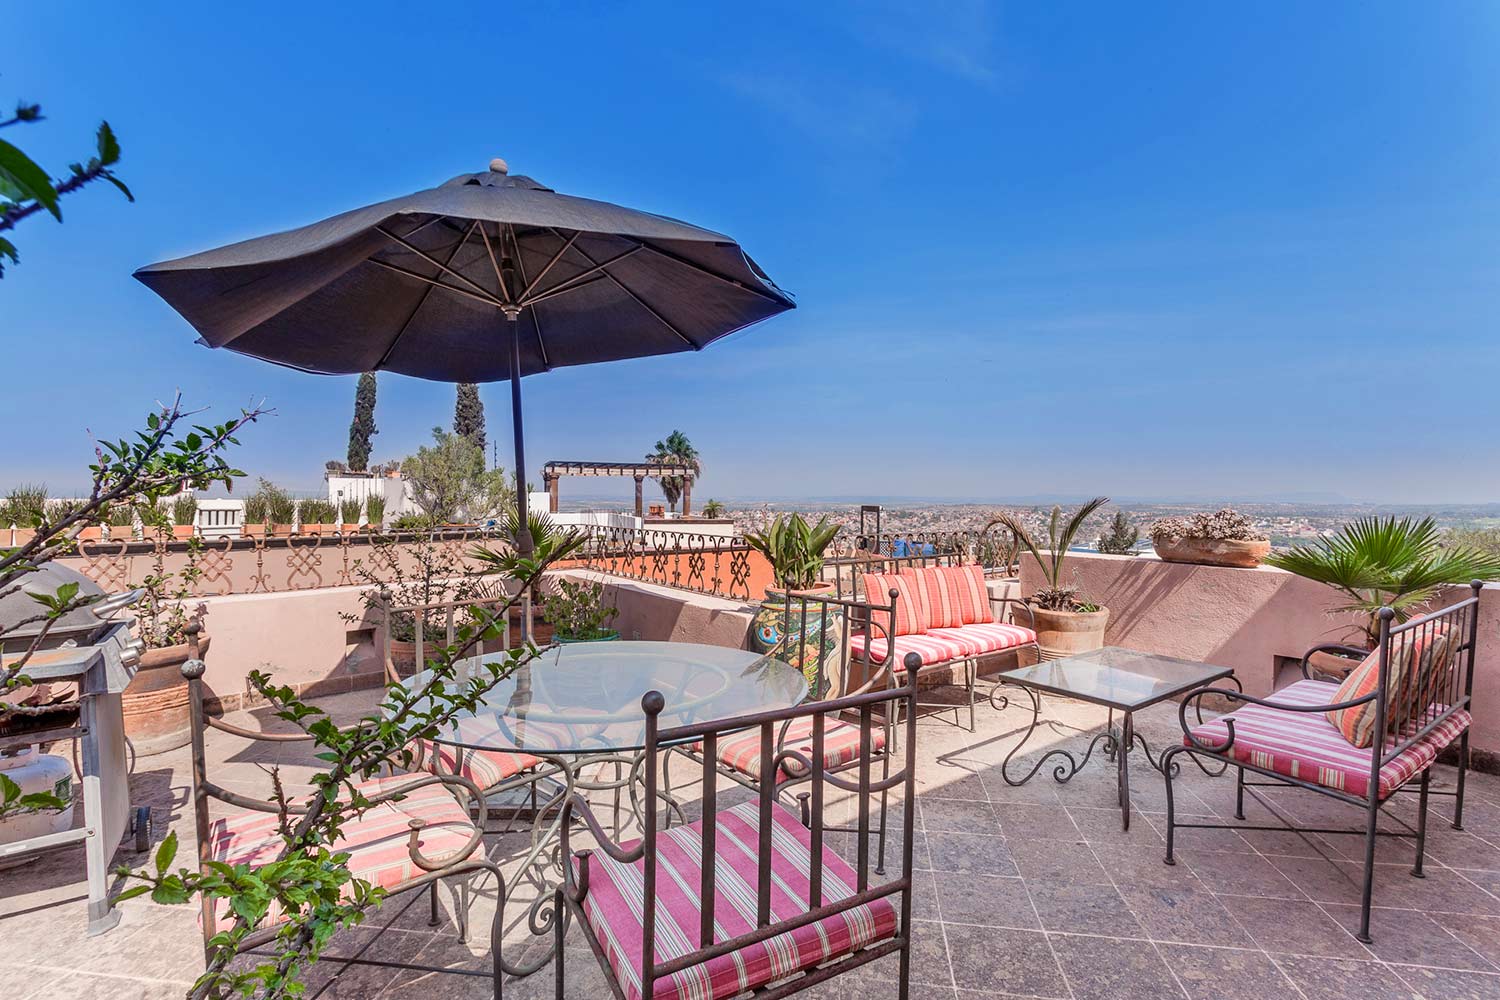 Photo of the Casa de la Vista View Terrace with Multiple Seating Areas and Umbrella and Table